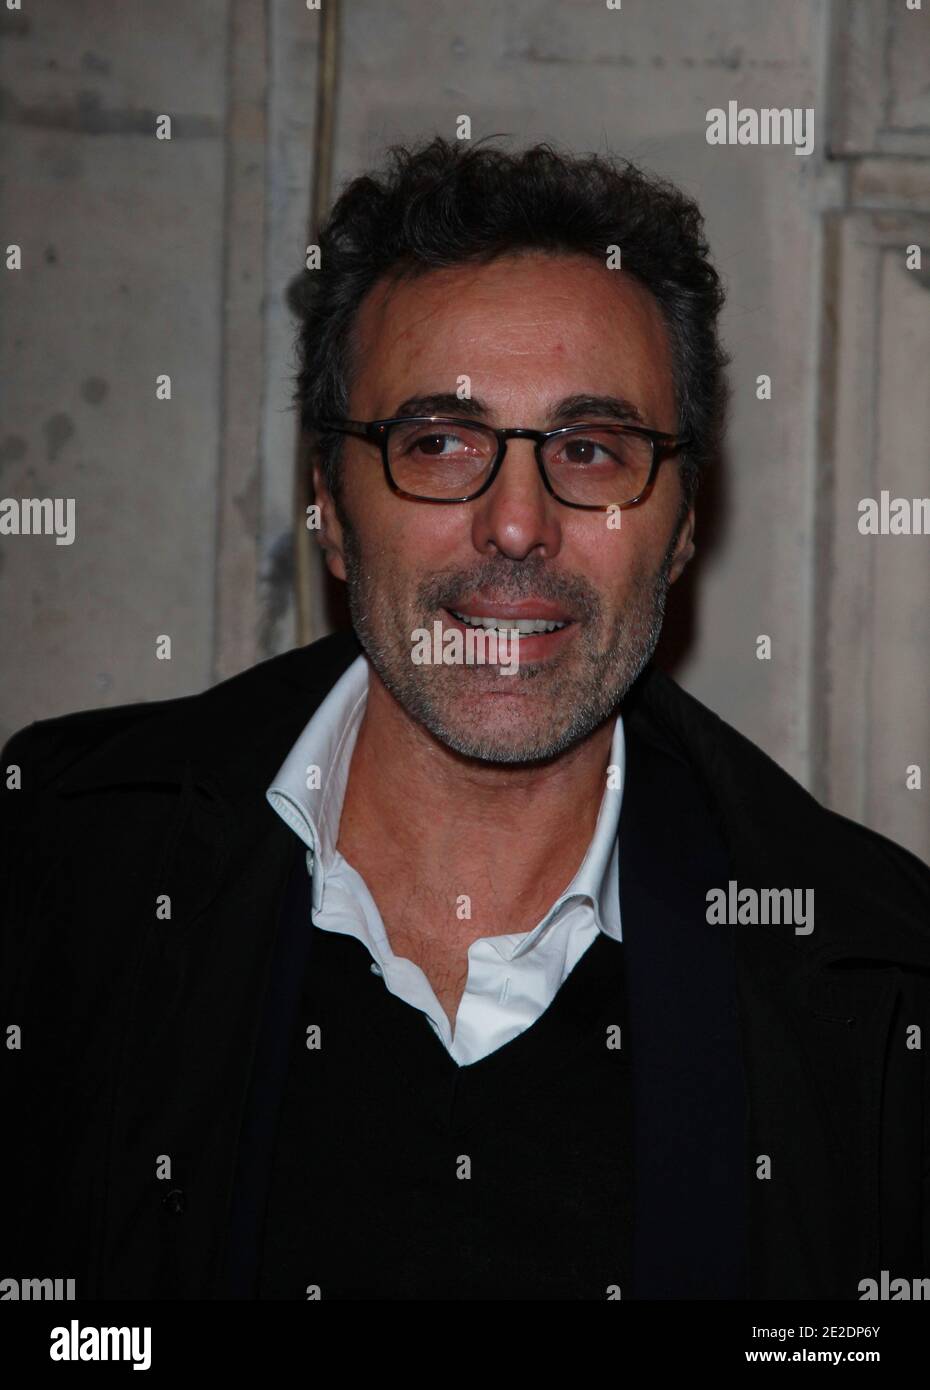 Gilbert Melki attending the 35th anniversry party of 'Premiere' (Famous French movies magazine) in Paris, France on November 14, 2011. Photo by Denis Guignebourg/ABACAPRESS.COM? Stock Photo